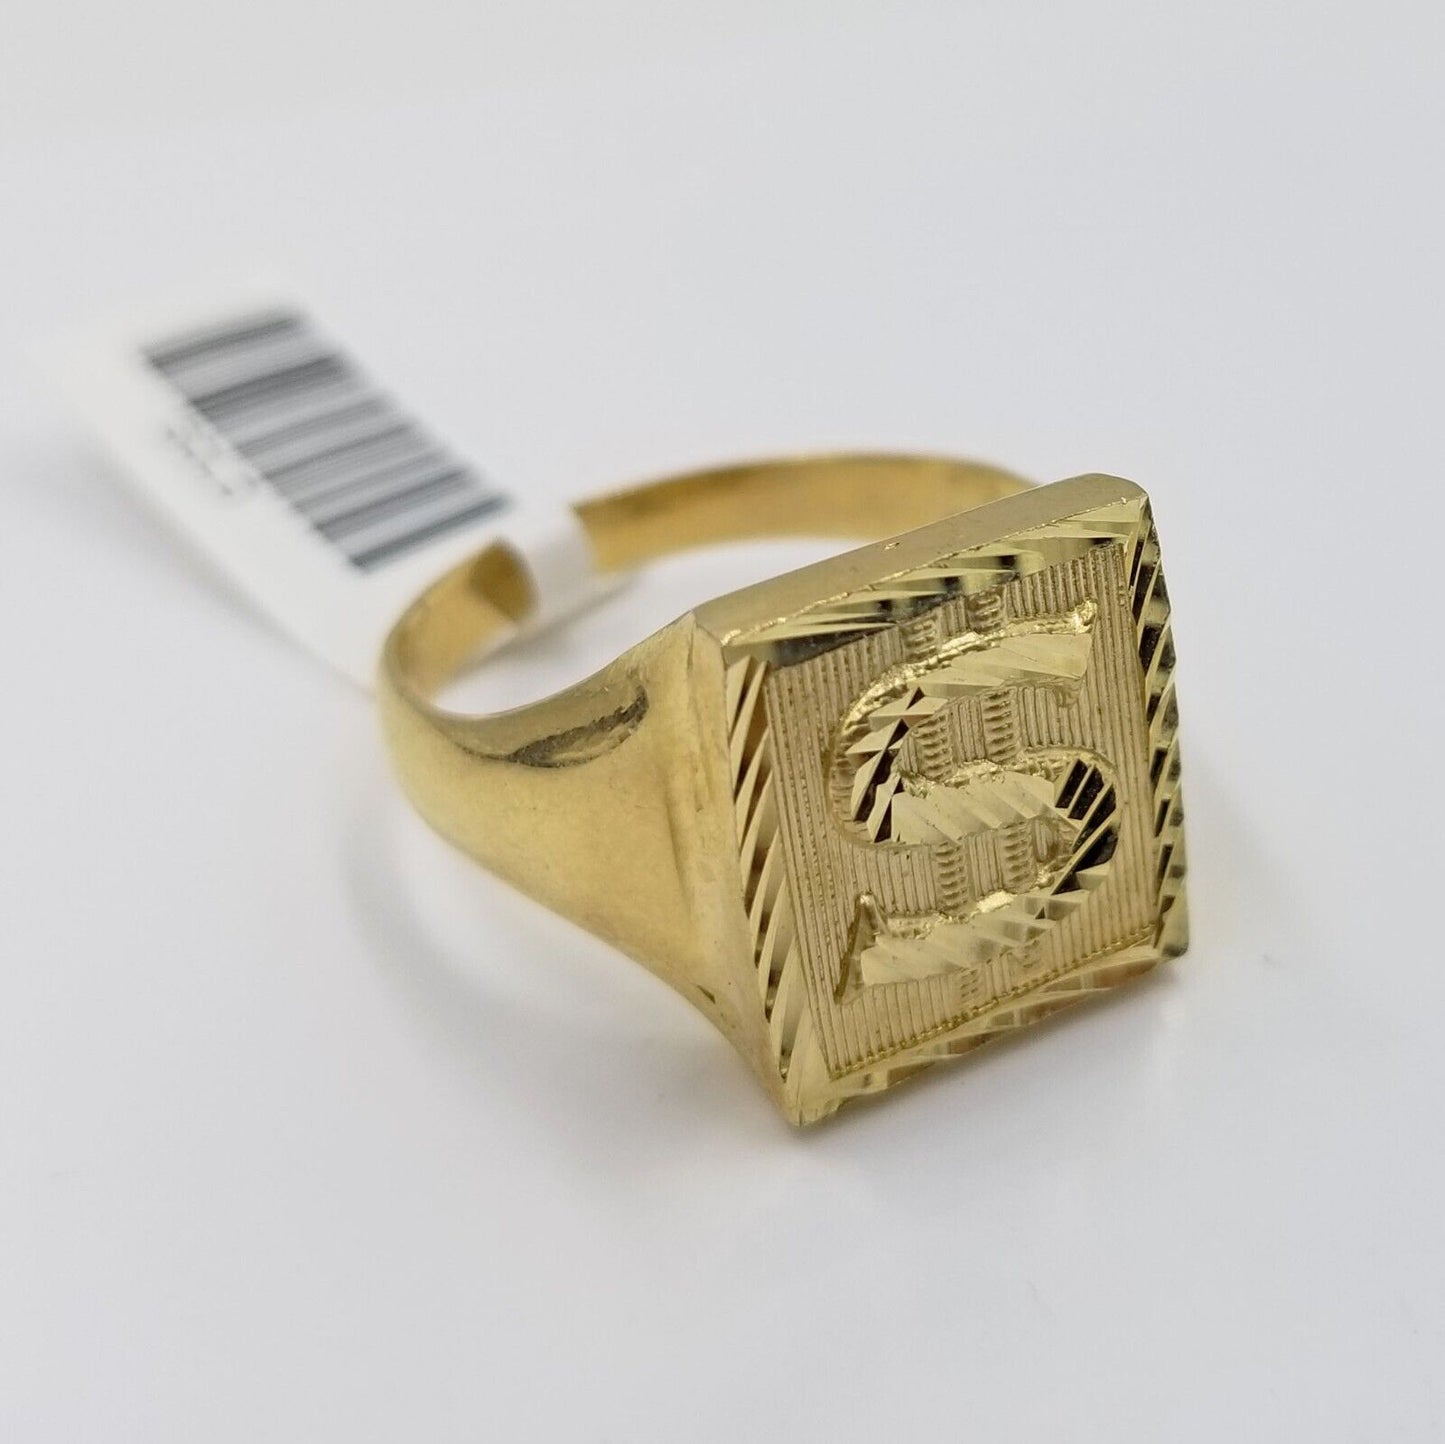 Real 10k Gold Men's Ring Dollar Sign size 10 10kt Yellow gold, casual pinky Band